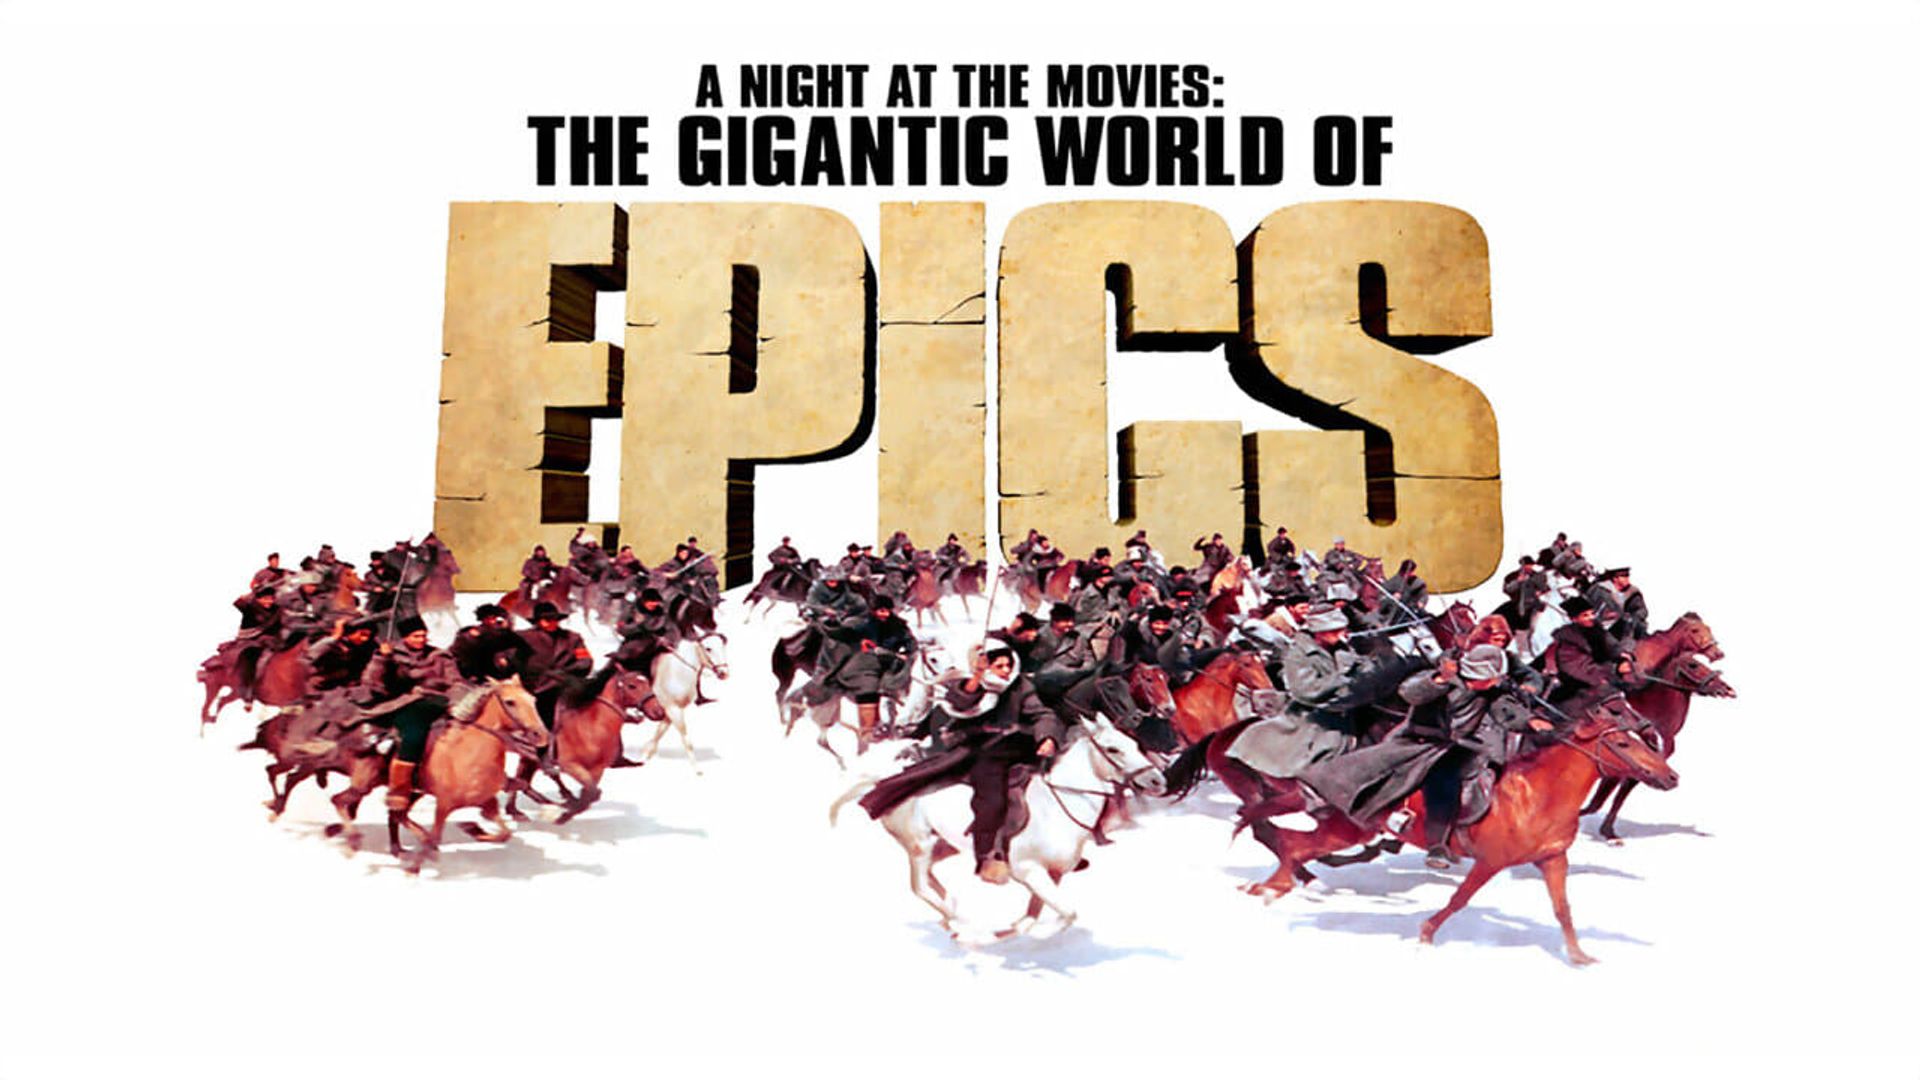 A Night at the Movies: The Gigantic World of Epics background